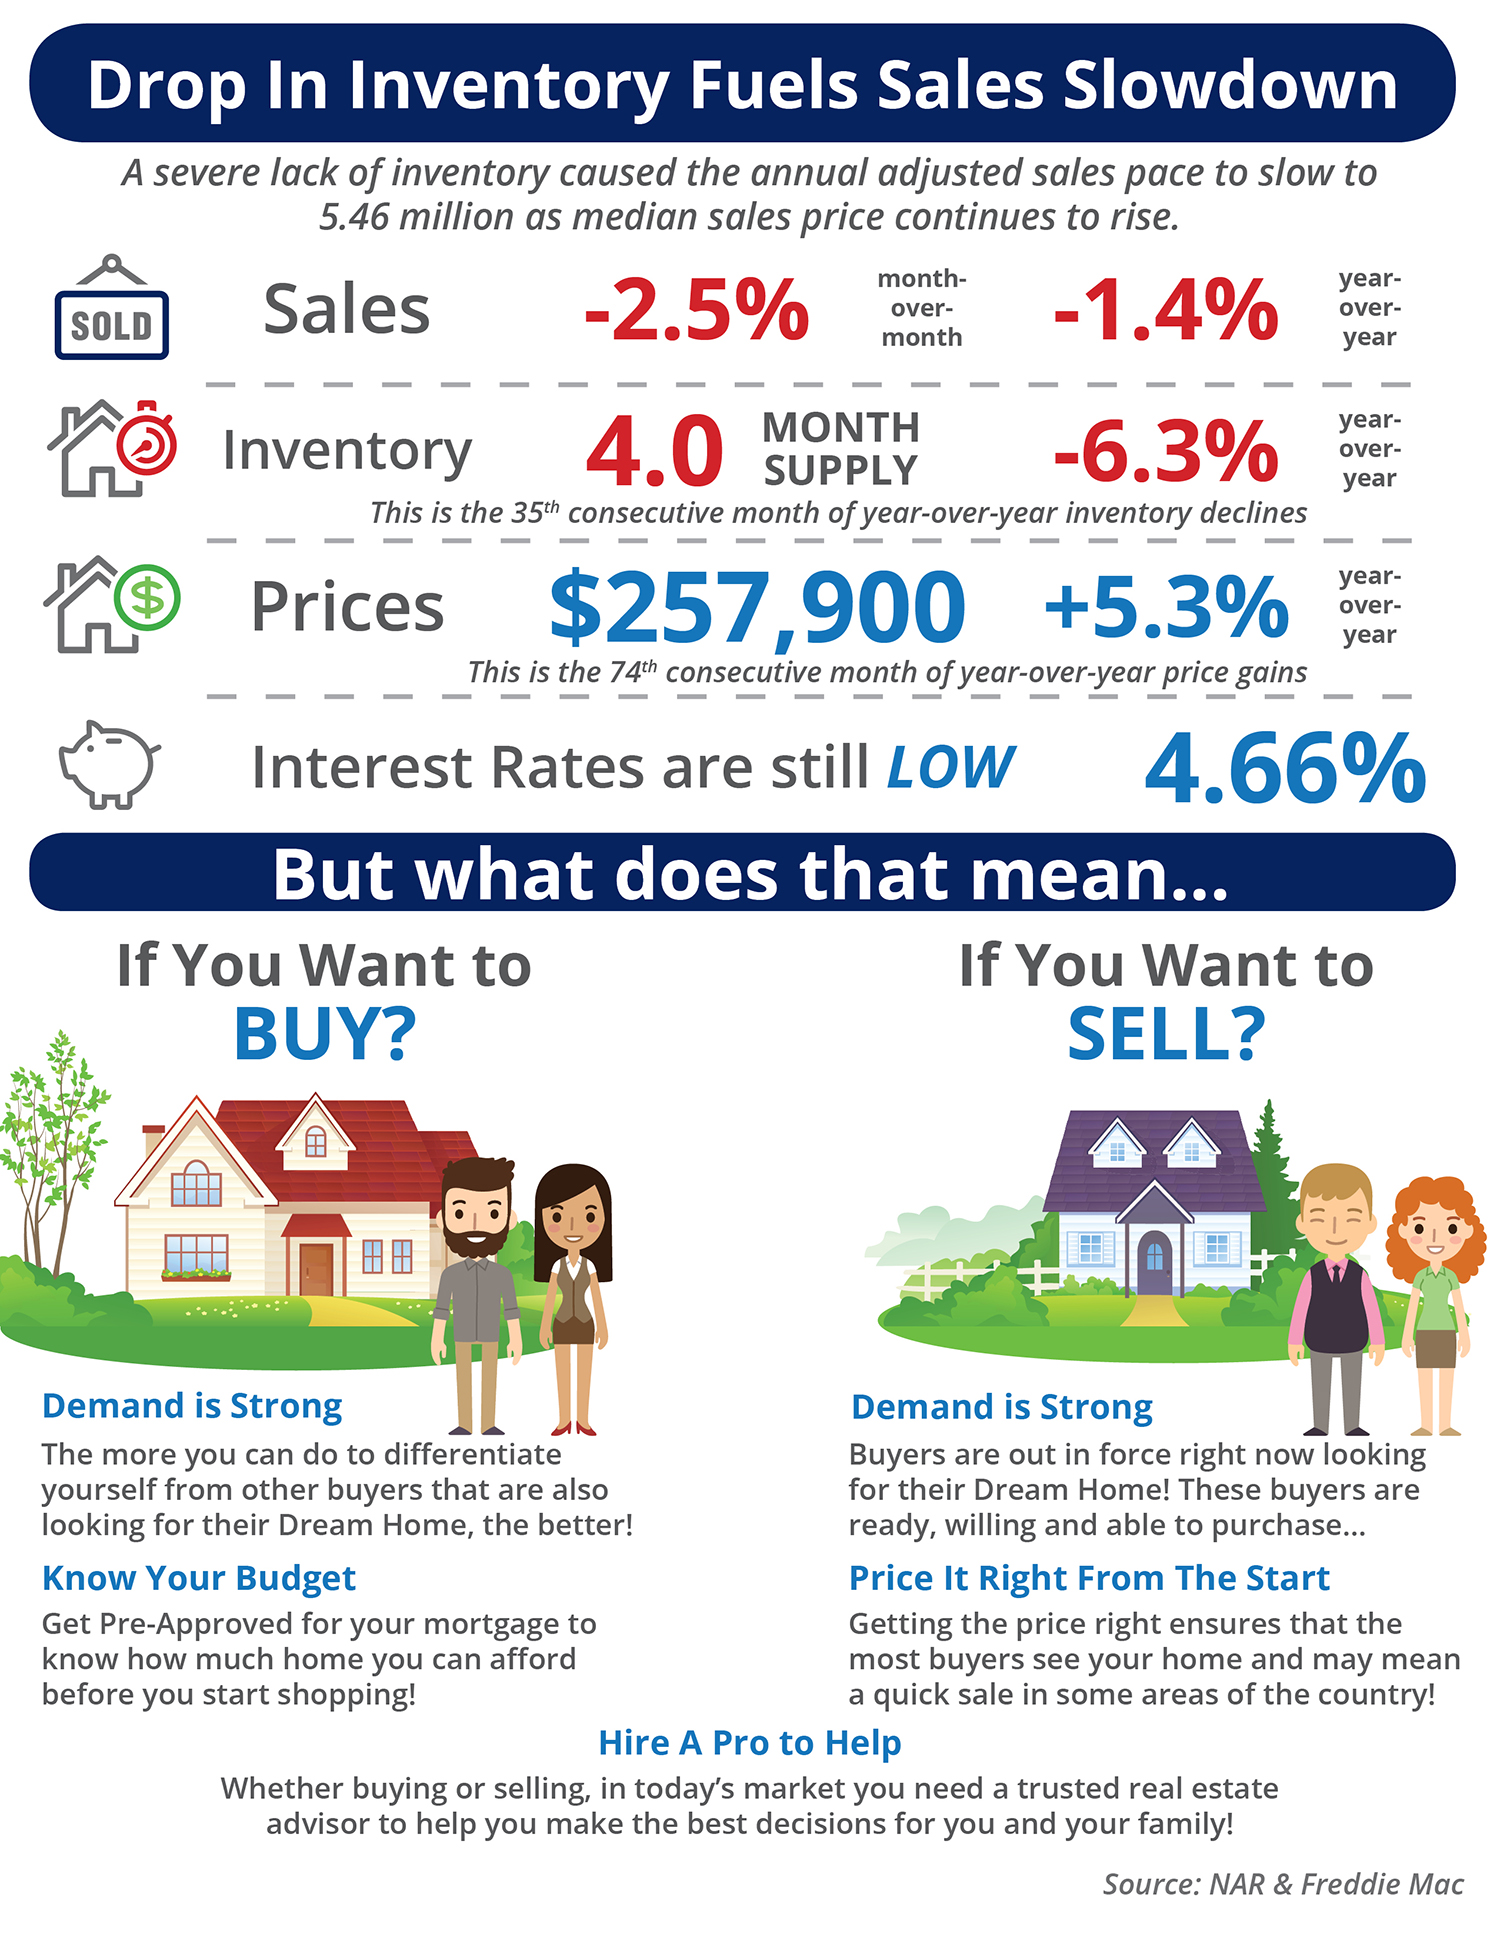 Drop in Inventory Fuels Sales Slowdown [INFOGRAPHIC] | Simplifying The Market